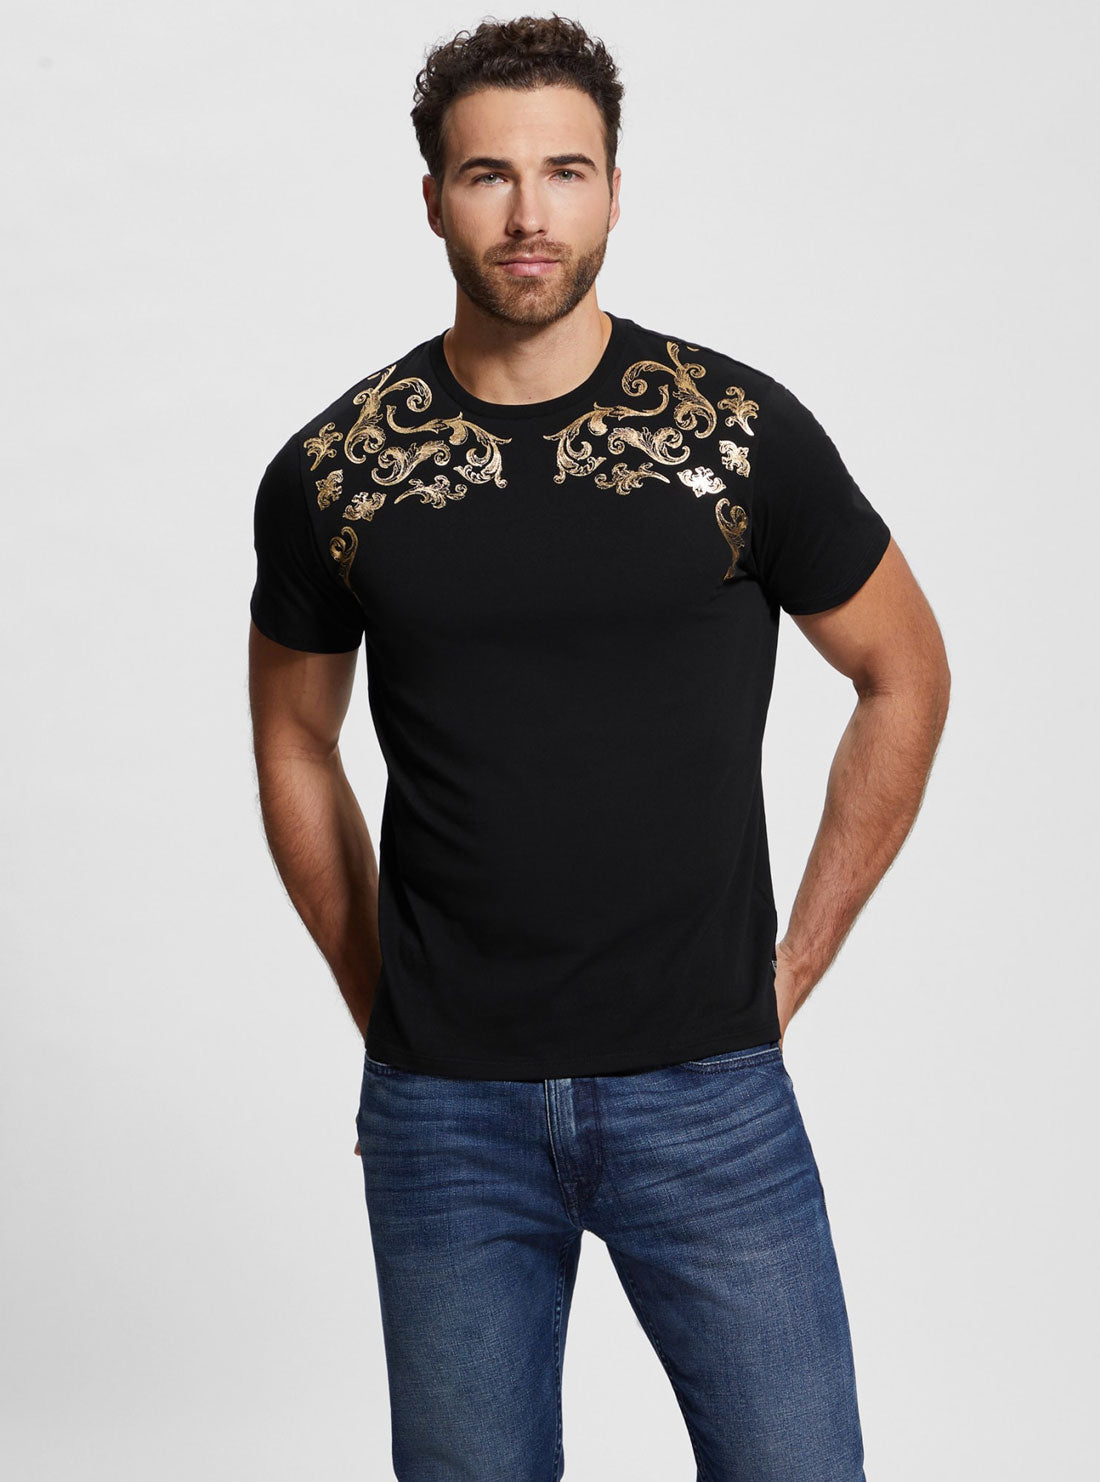 GUESS Black Gold Barque T-Shirt front view